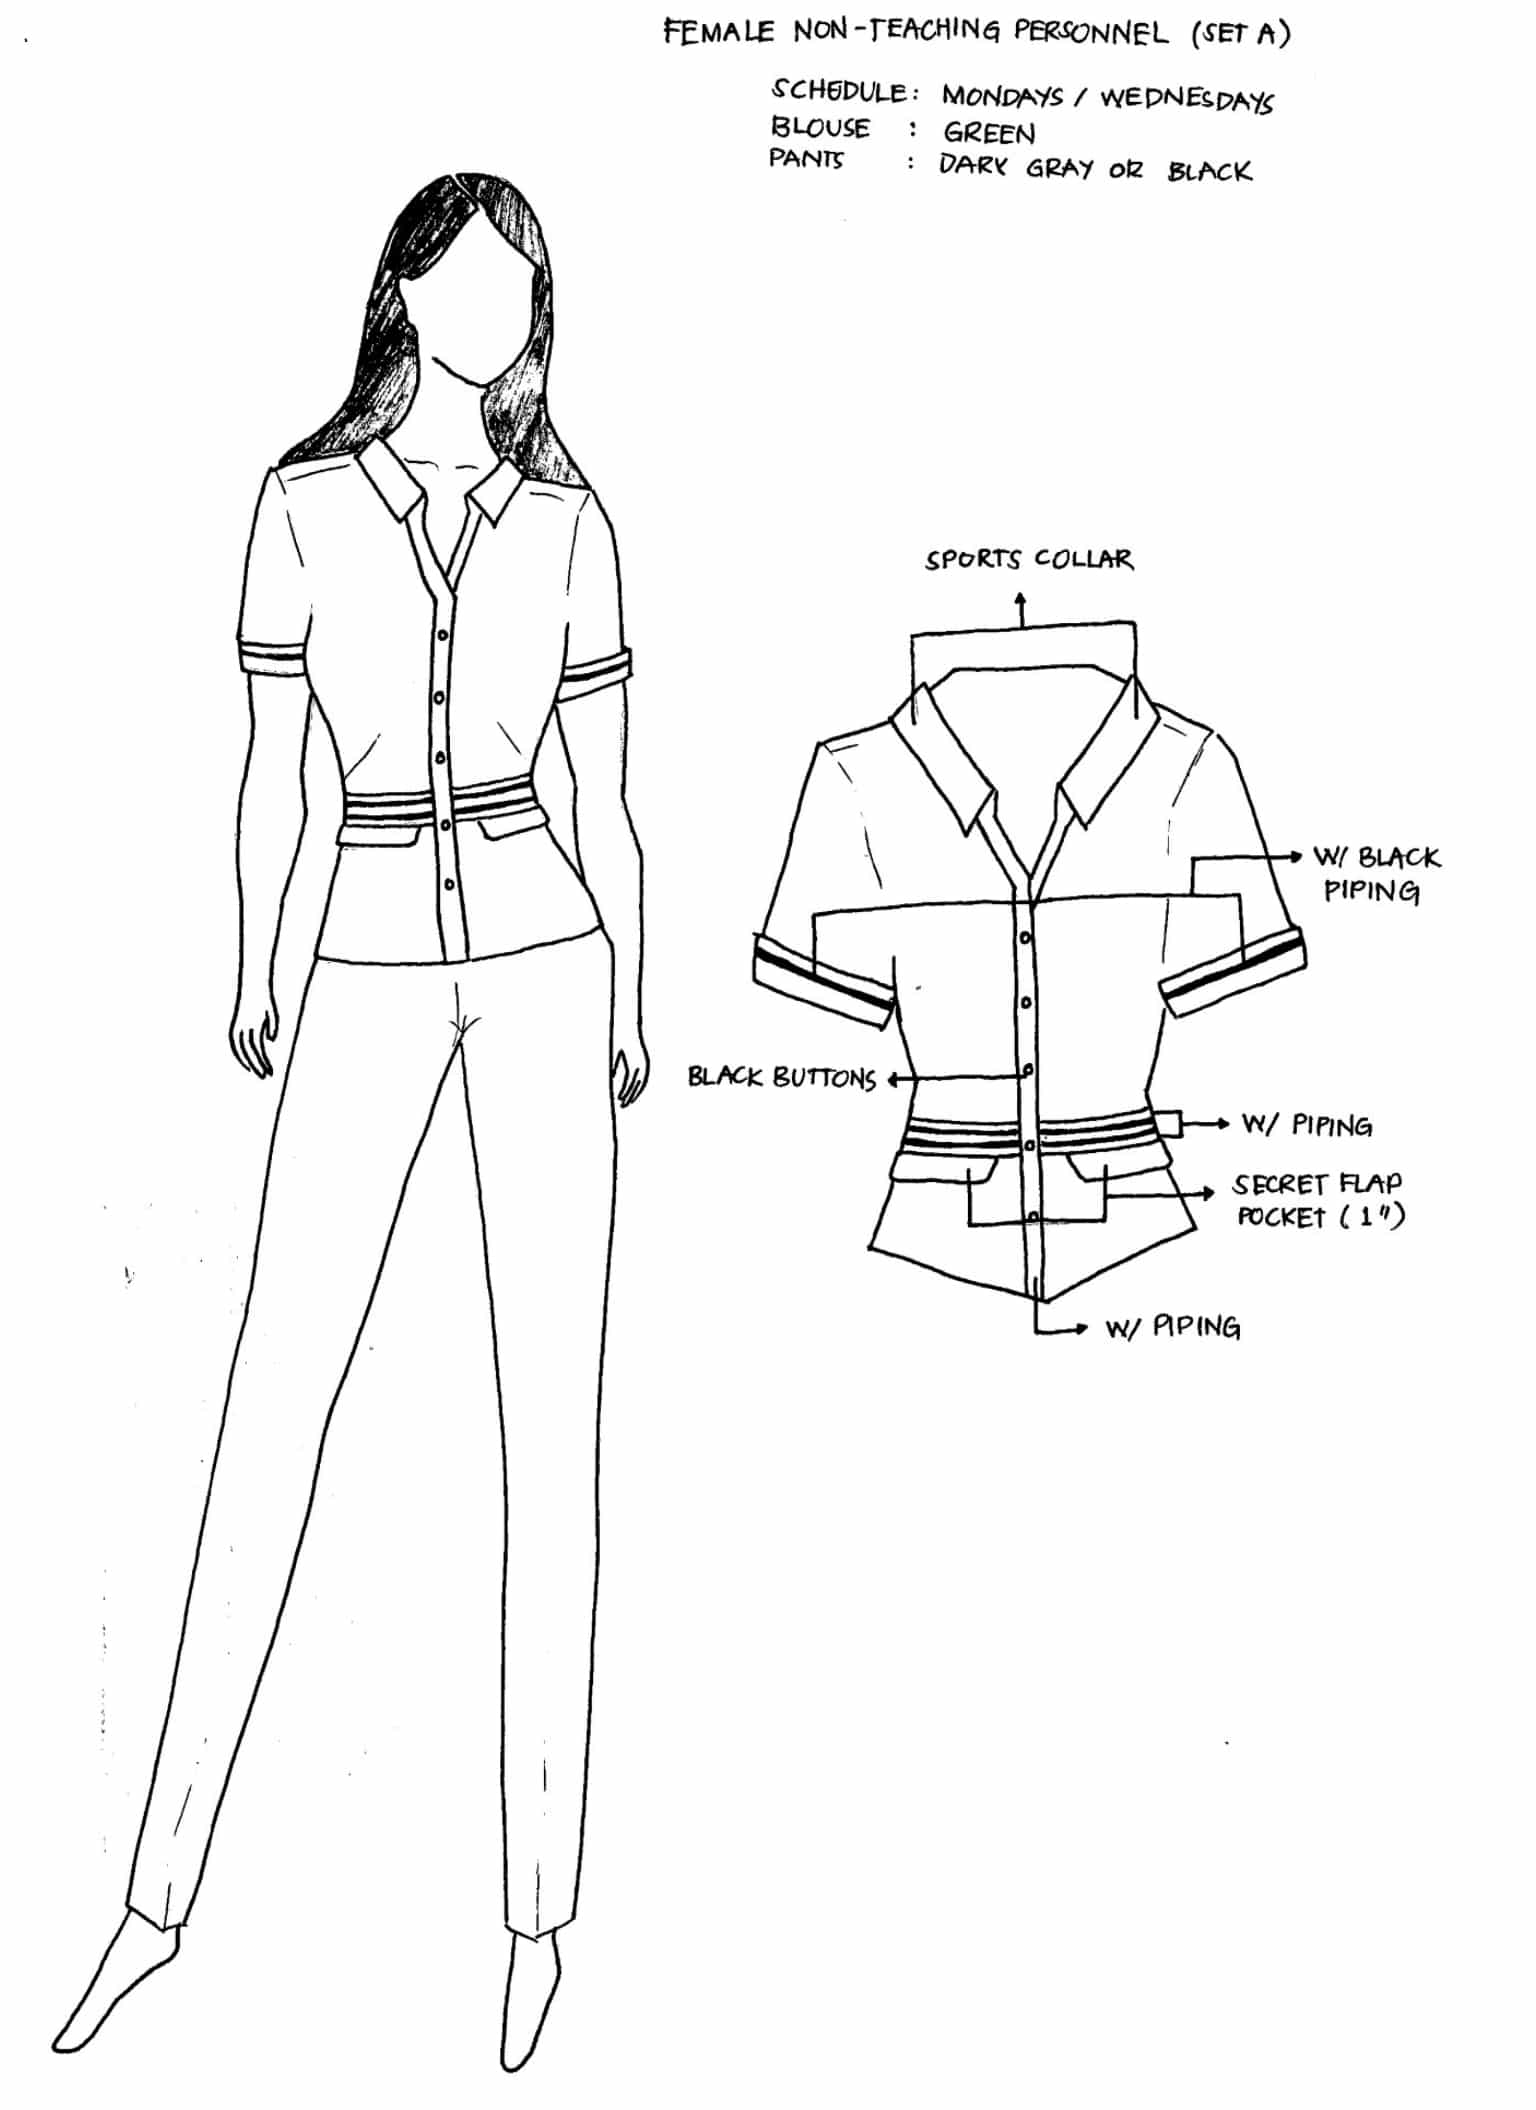 DepEd National Uniforms Female Non-Teaching Personnel (SET A)